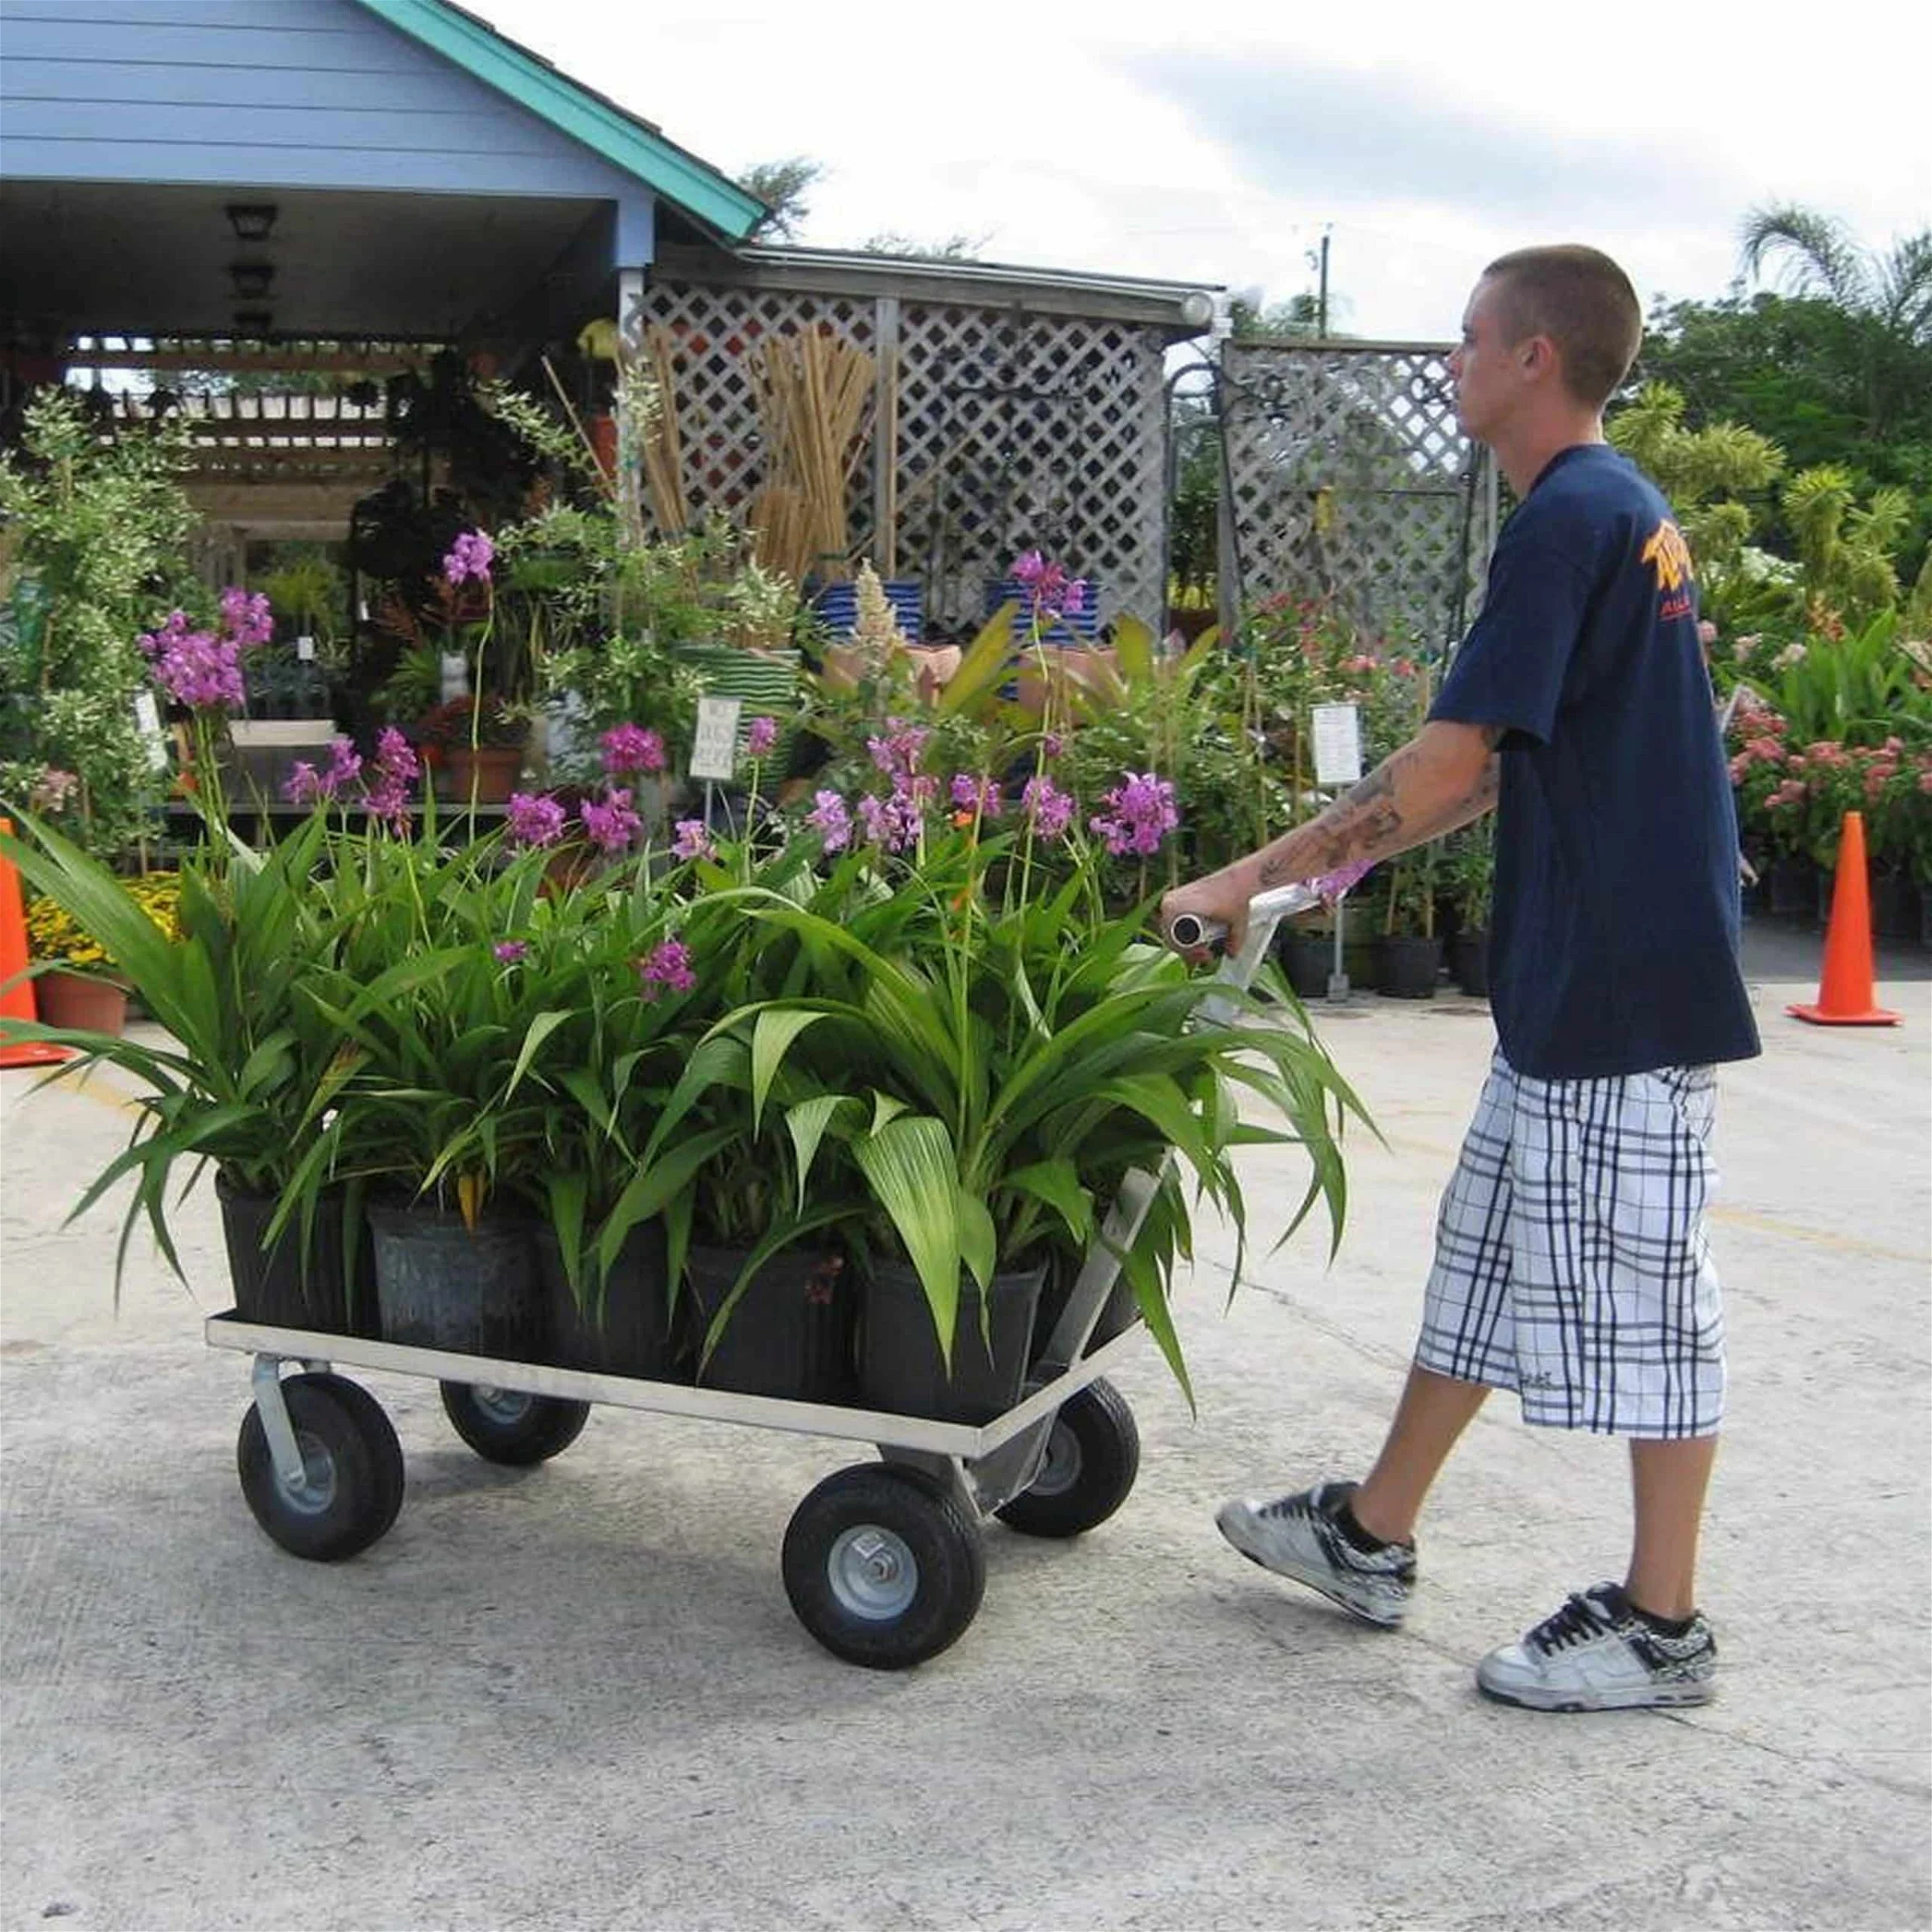 A person using the Kahuna Wagon all aluminum Push Wagon loaded with potted plants.